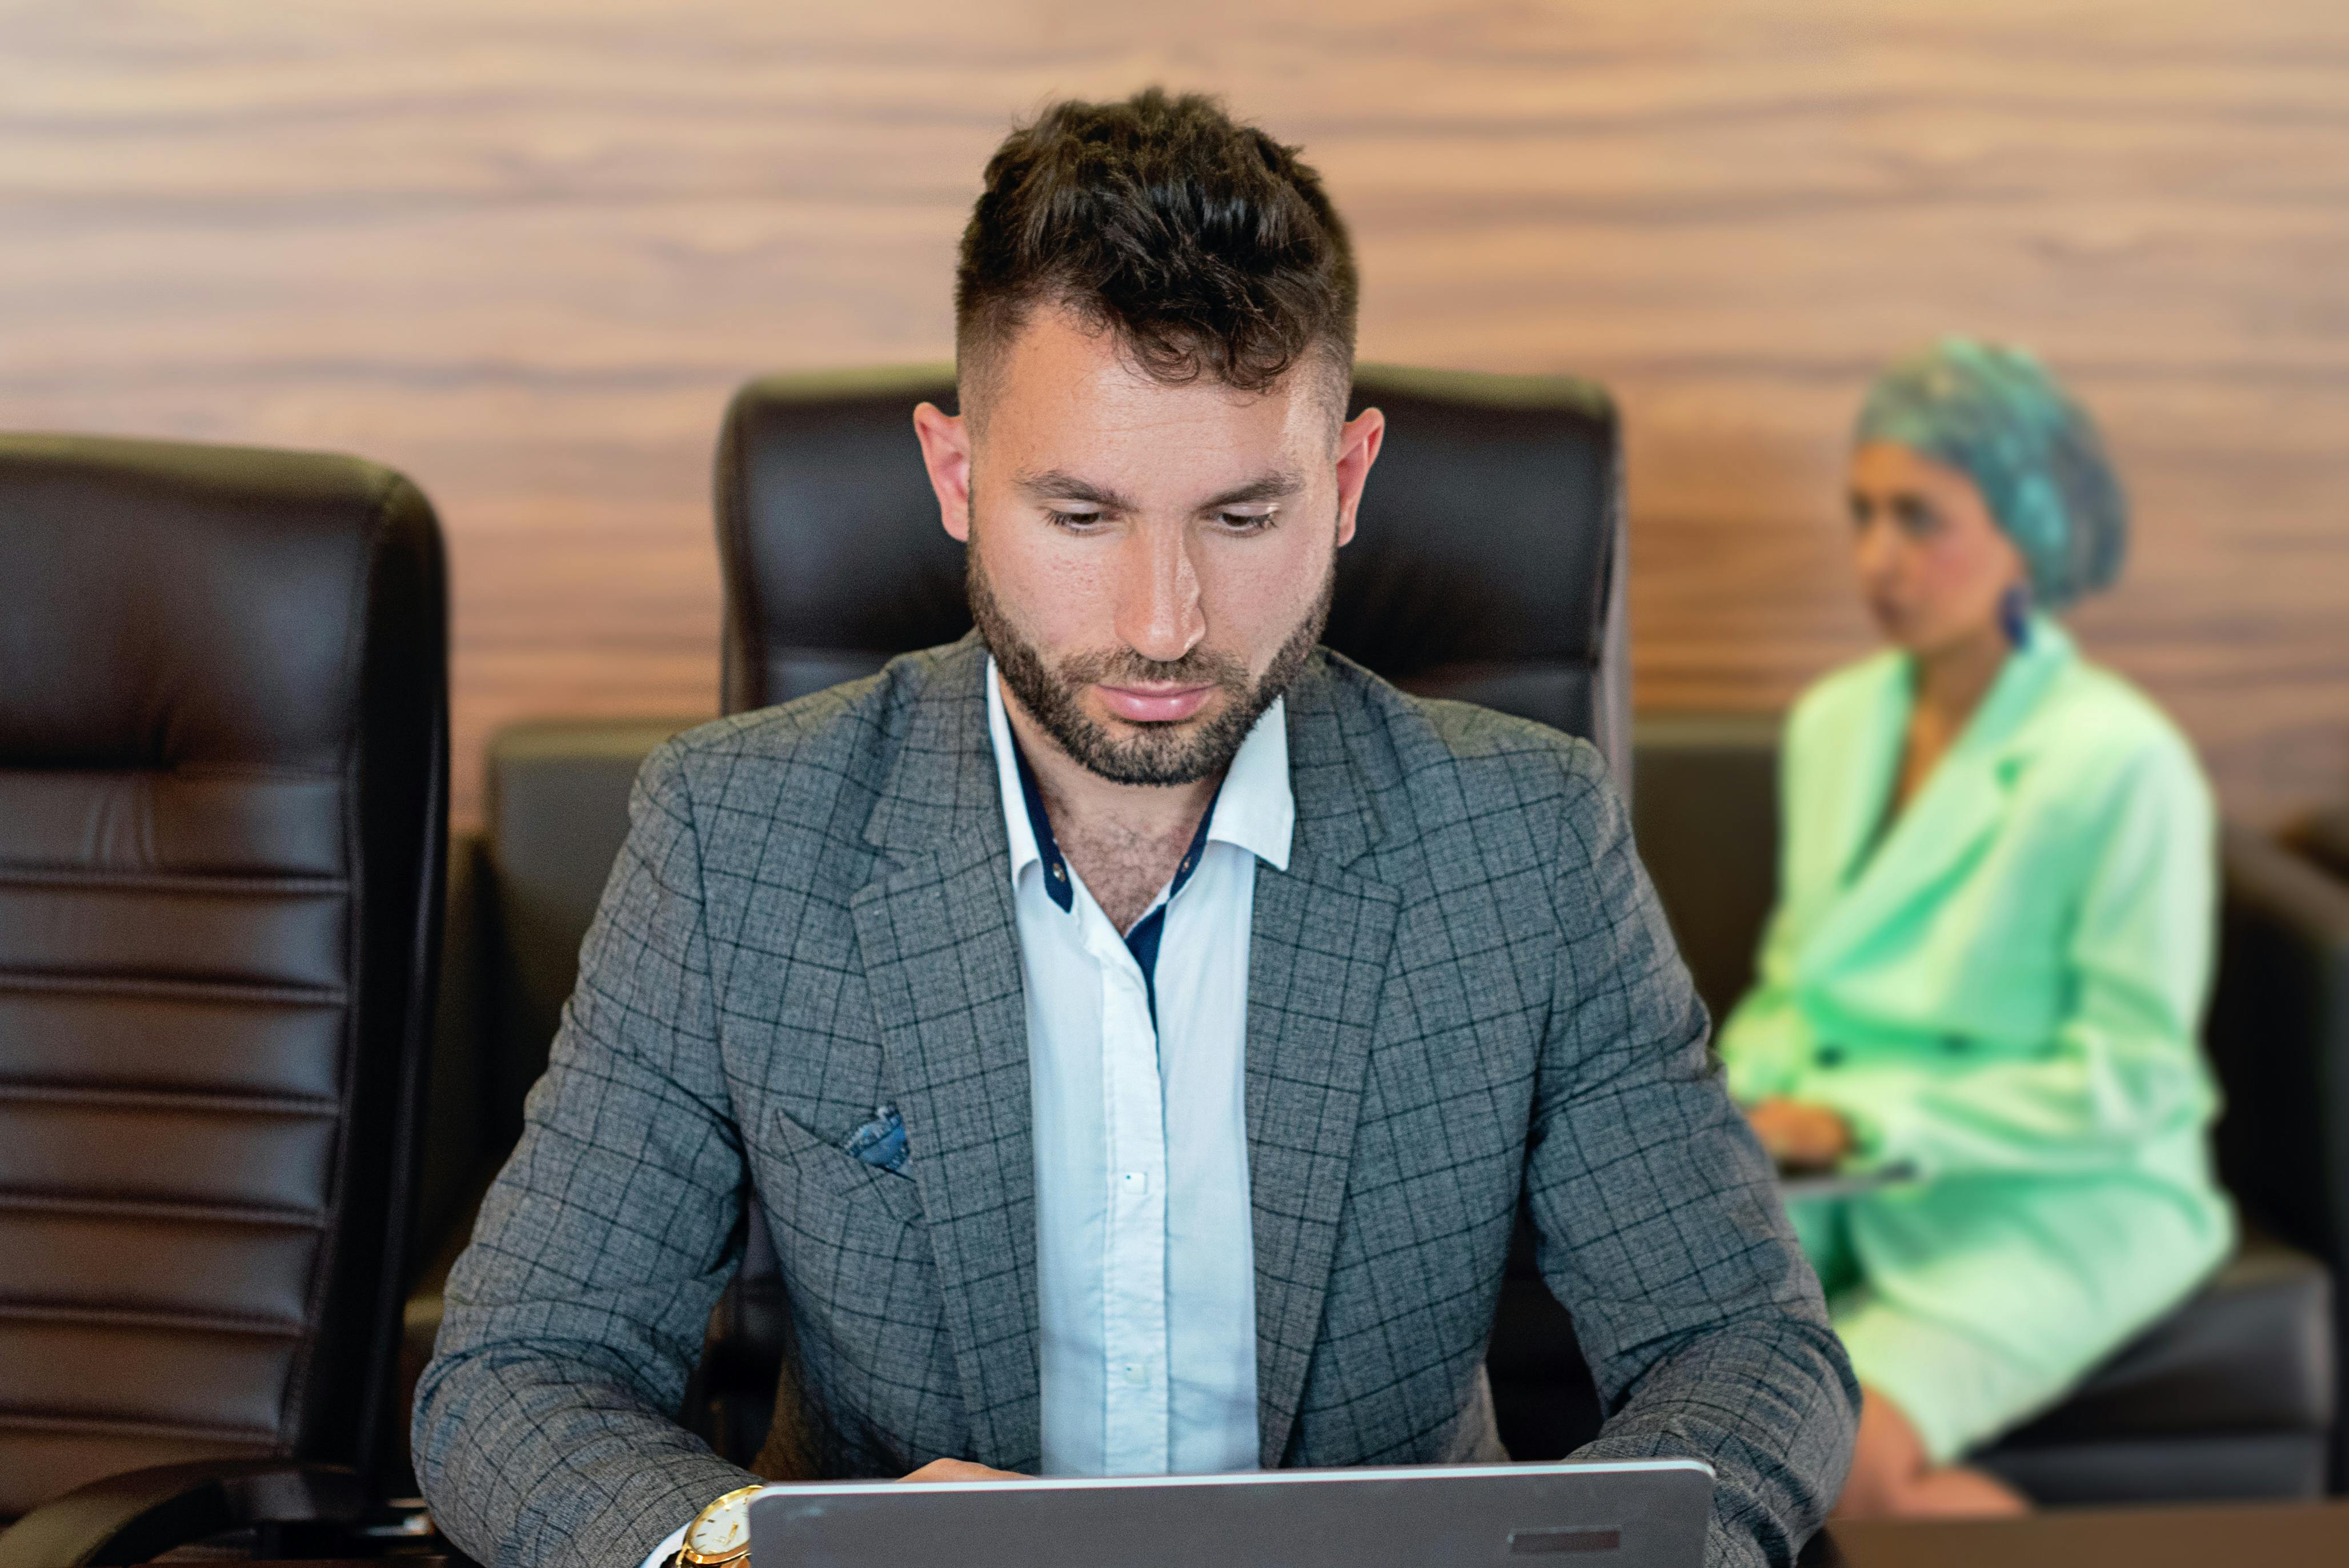 Free A Bearded Man Wearing a Gray Plaid Suit Stock Photo